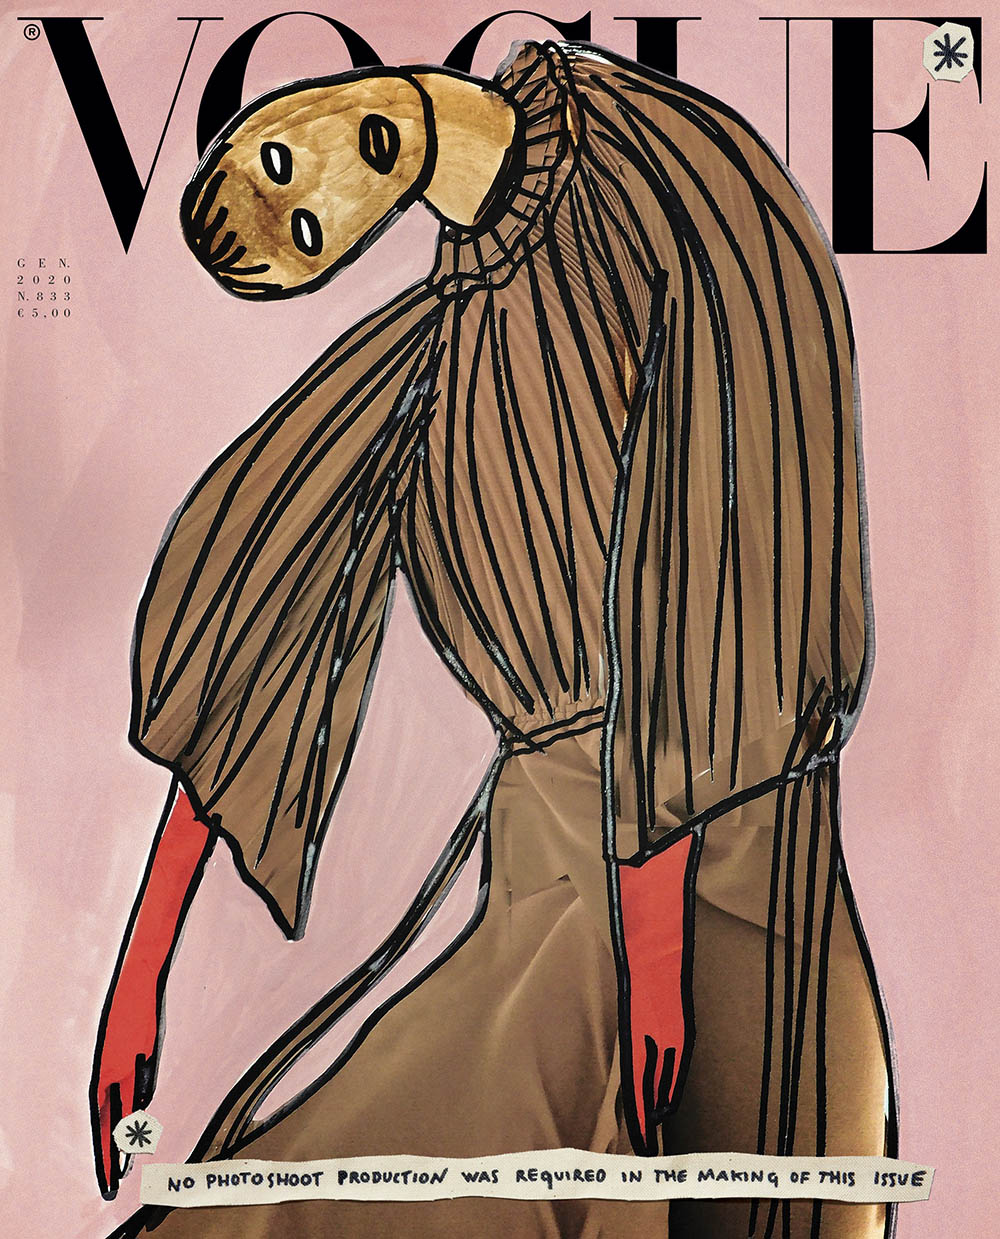 Illustrations for the first time on Vogue Italia January 2020 covers